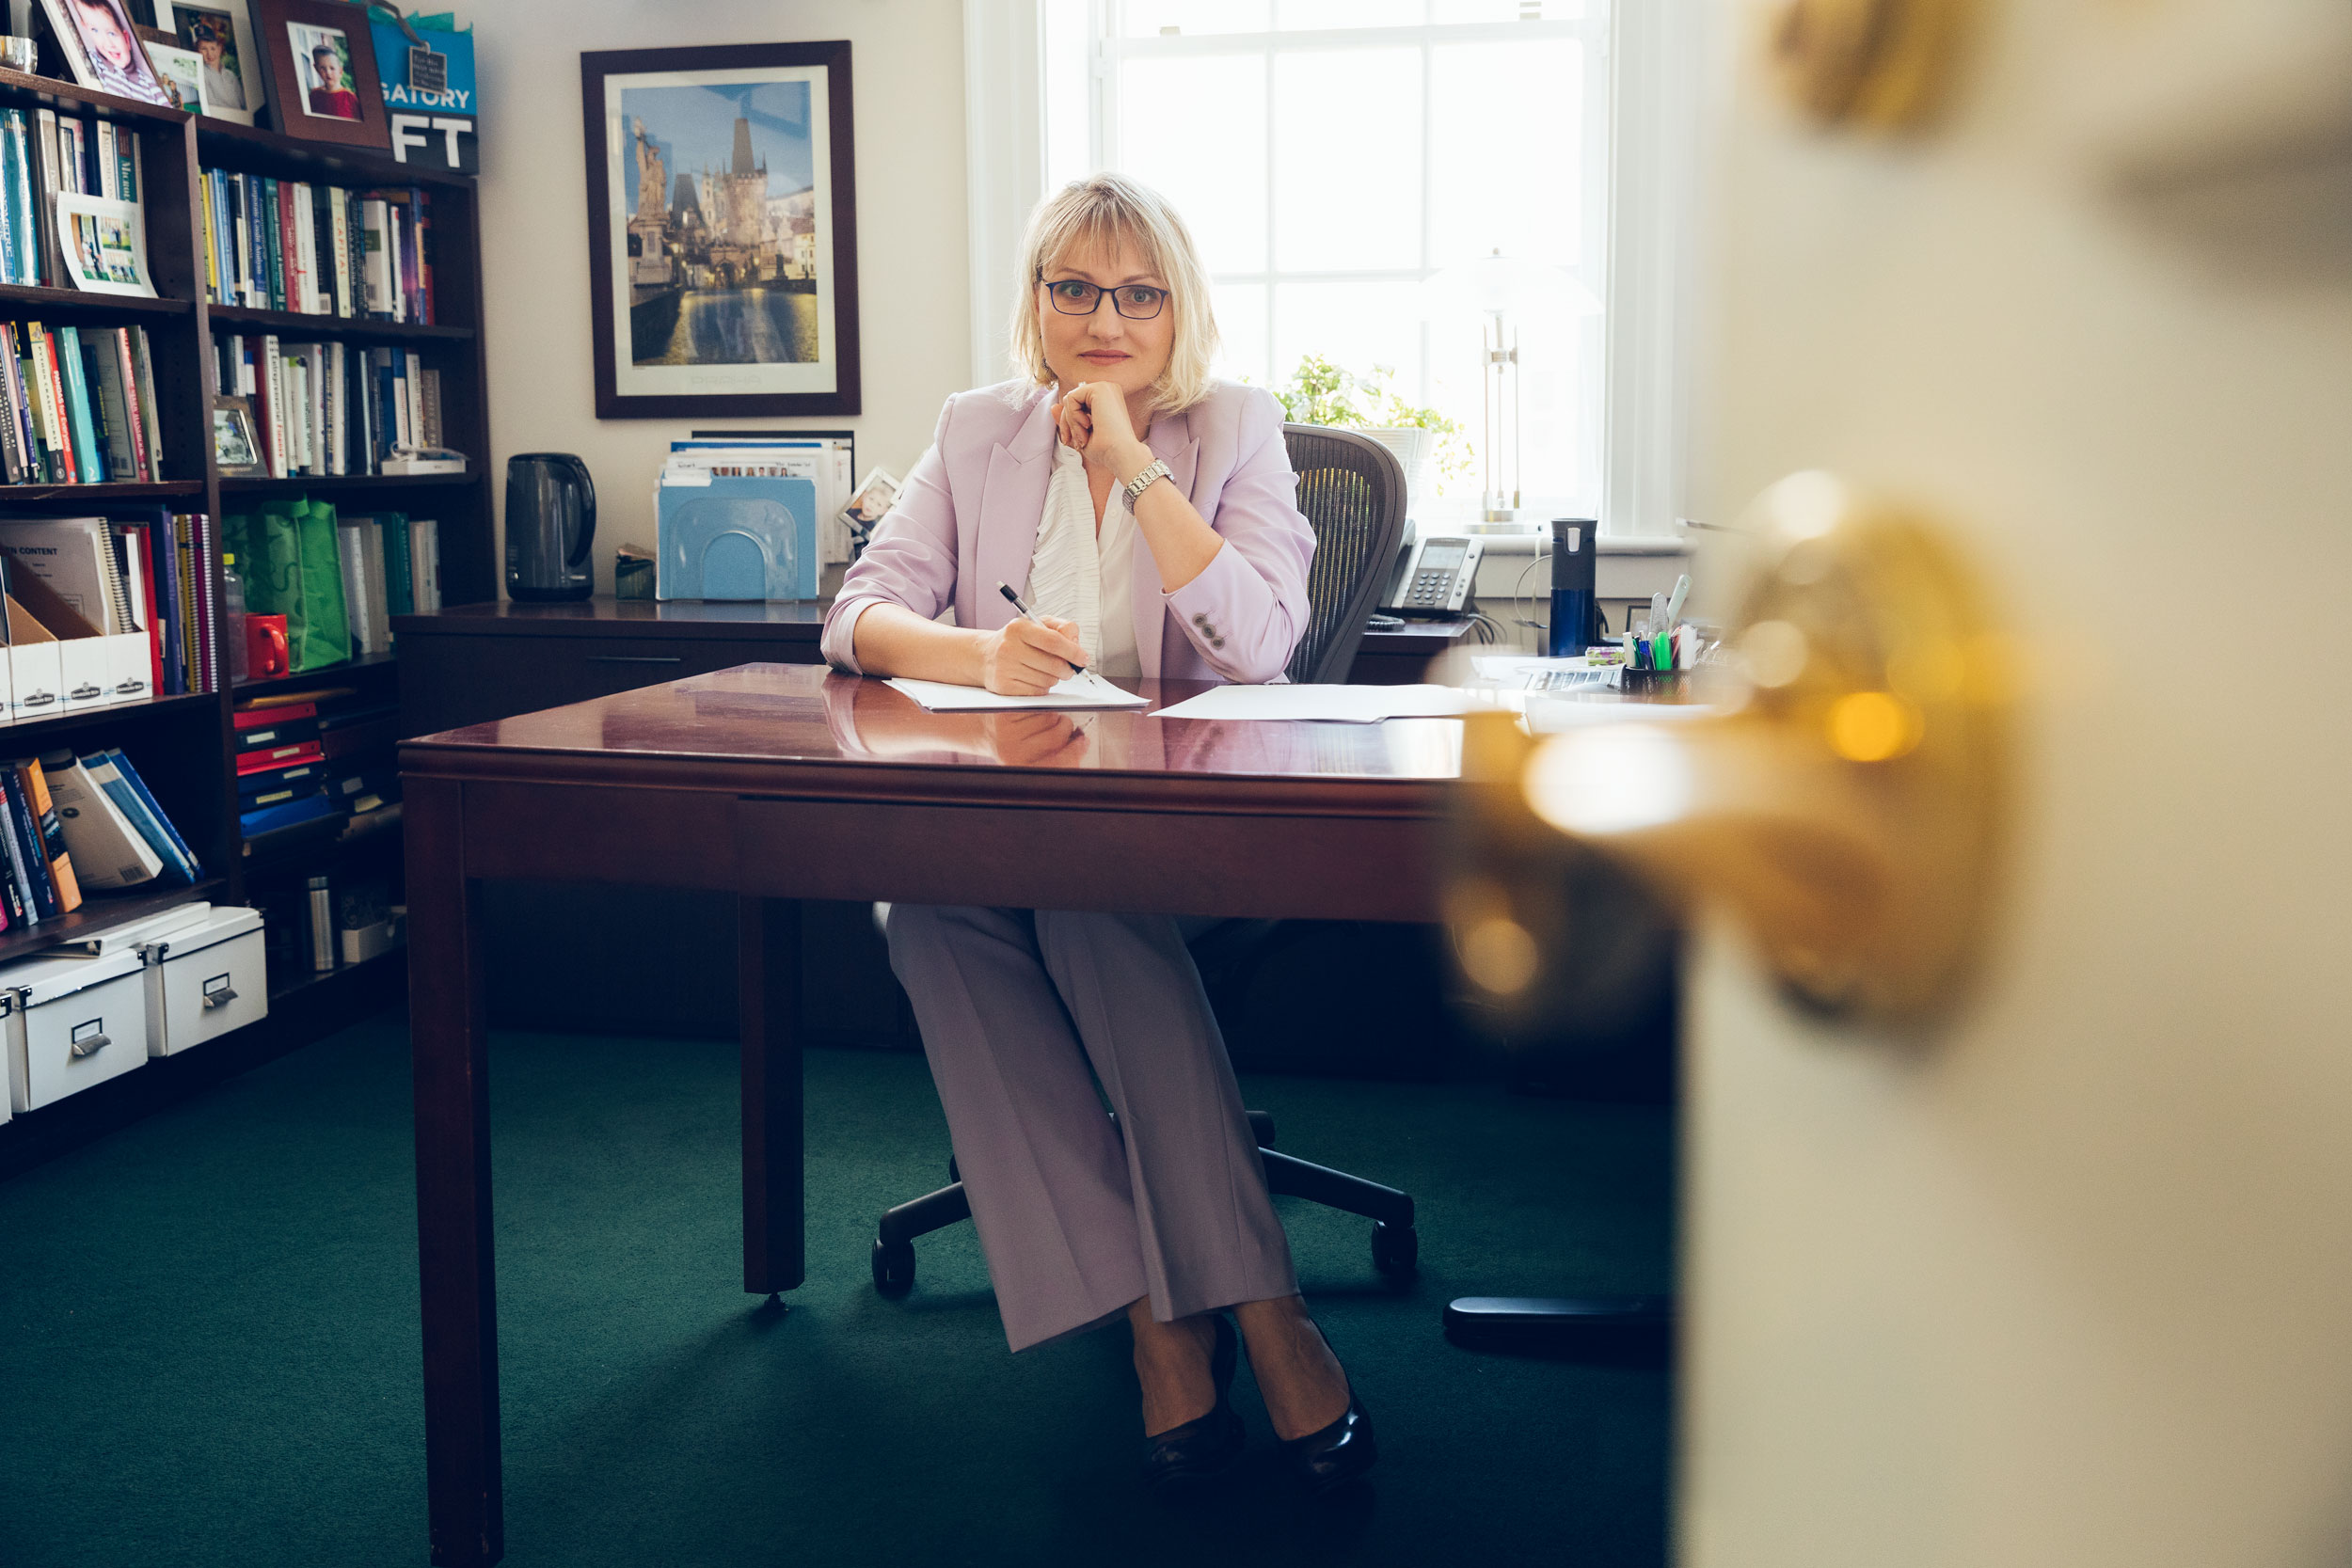 A professor at University of Virginia Darden School of Business poses for a portrait at her office desk.